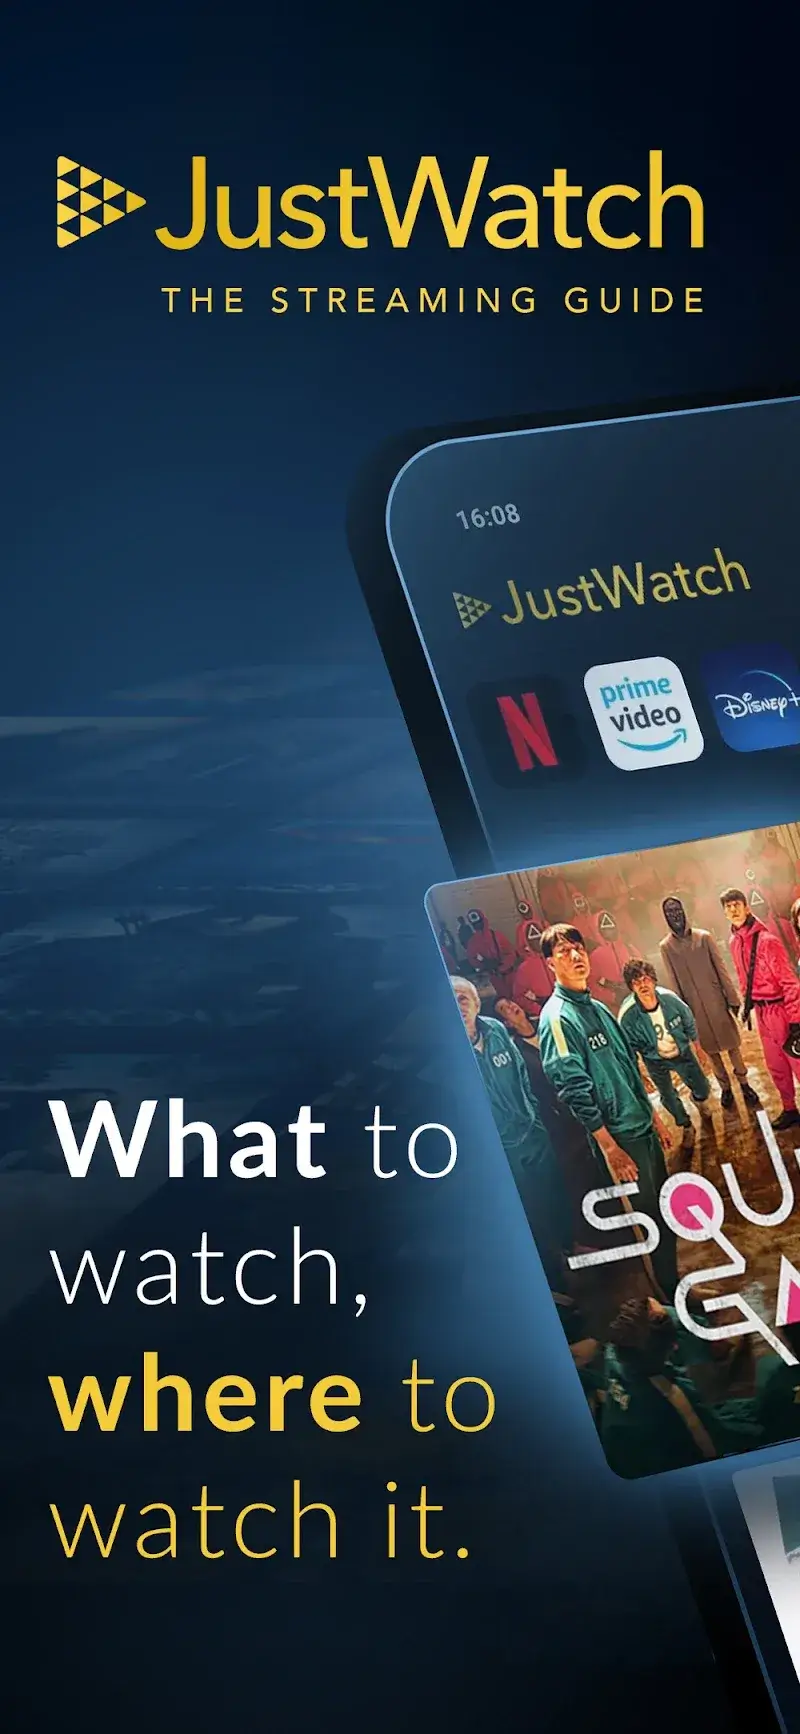 Justwatch Streaming Guide 2